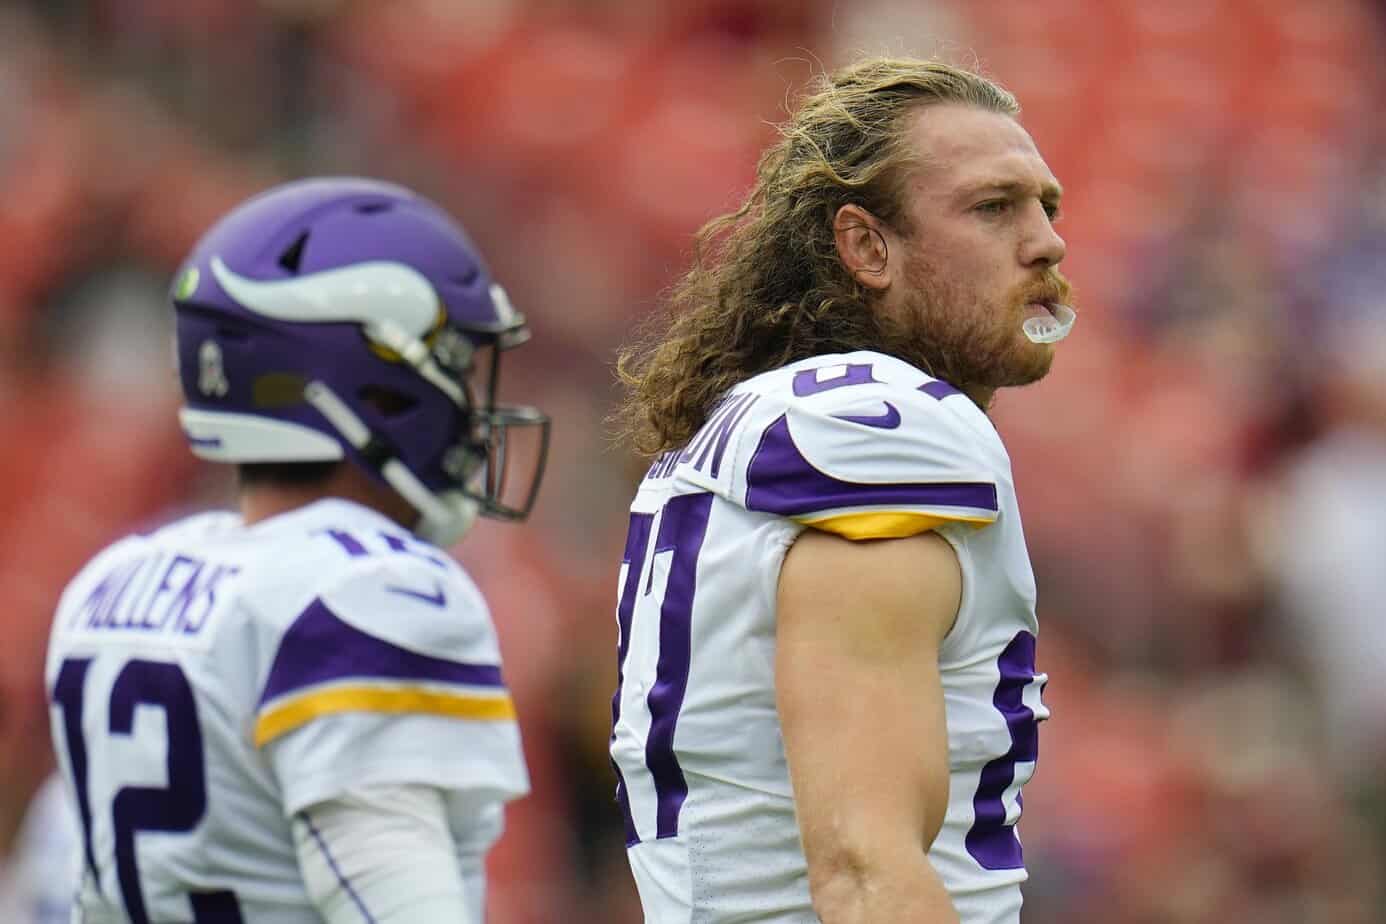 The OwnersBox NFL DFS slate has some changes for Vikings-Eagles DFS on Thursday Night Football, so let's look at DFS value plays on the...